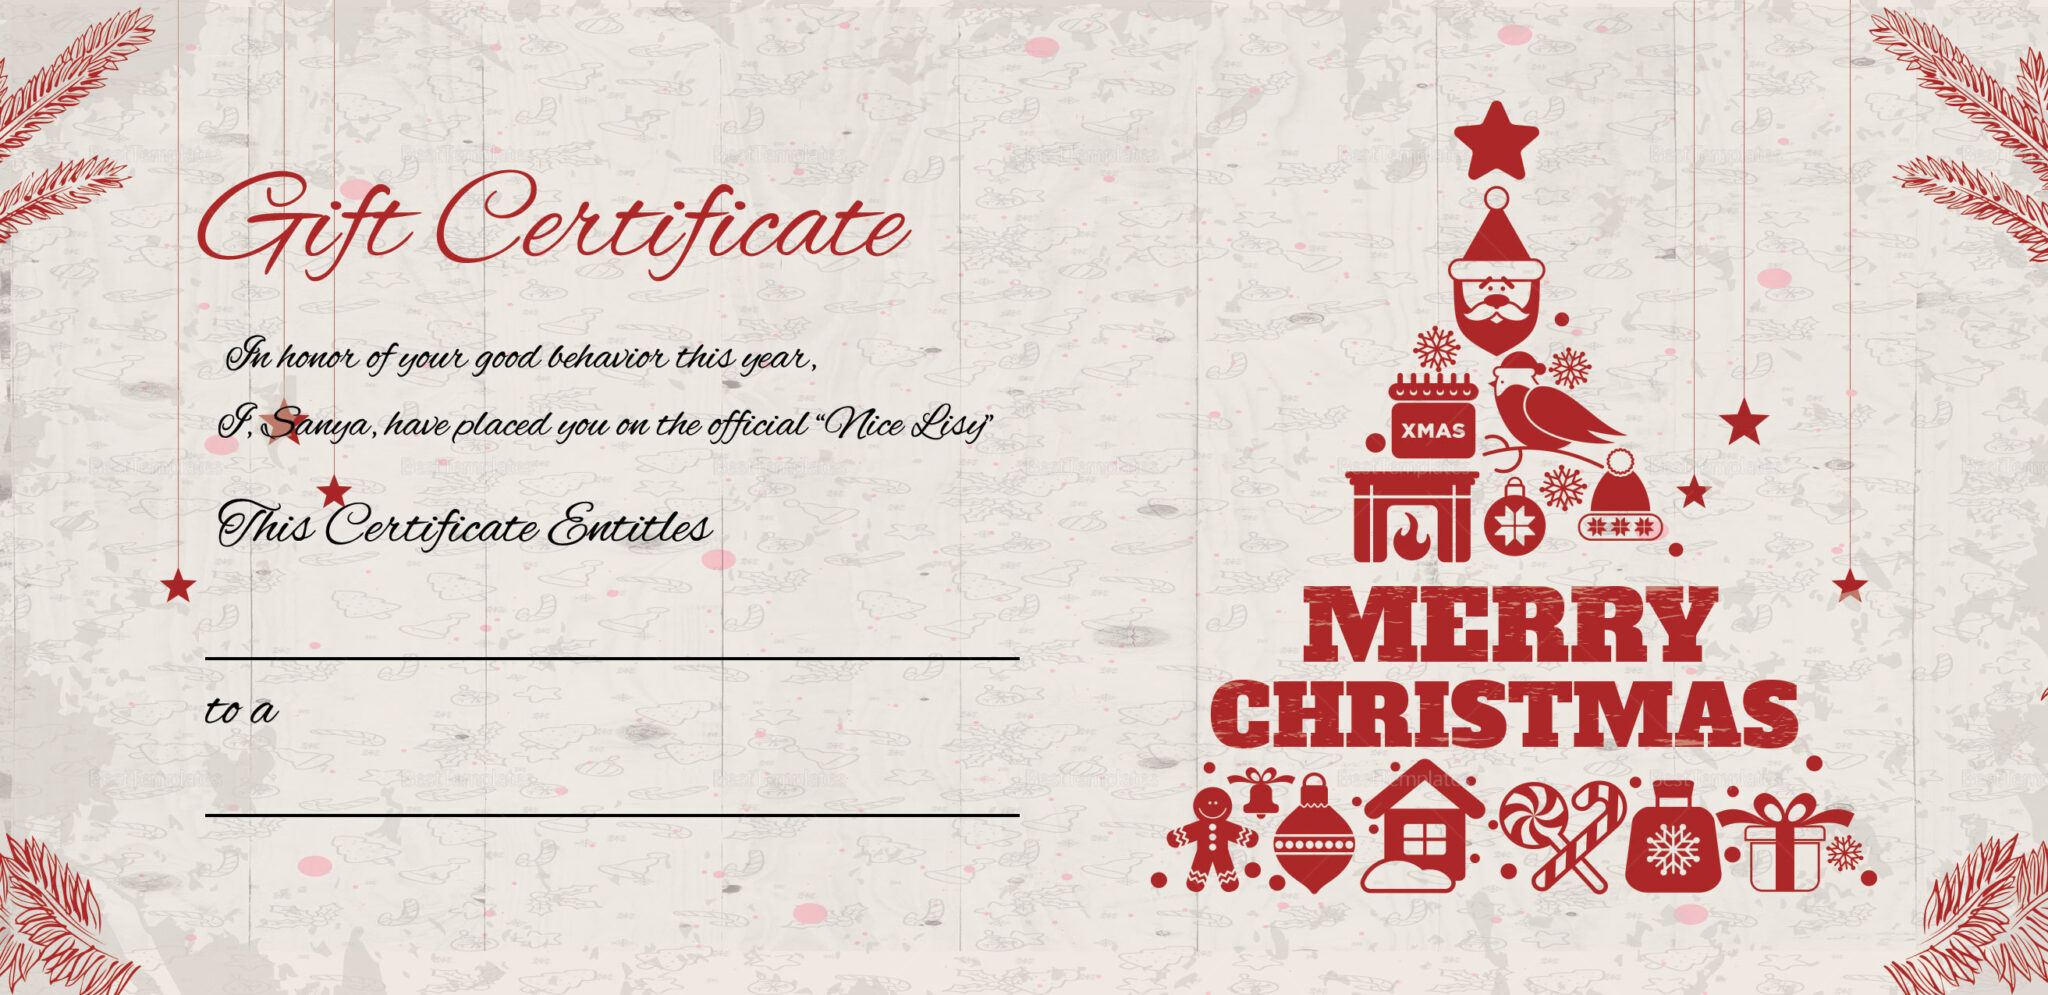 christmas-gift-voucher-template-2023-cool-ultimate-awesome-famous-christmas-eve-outfits-2023